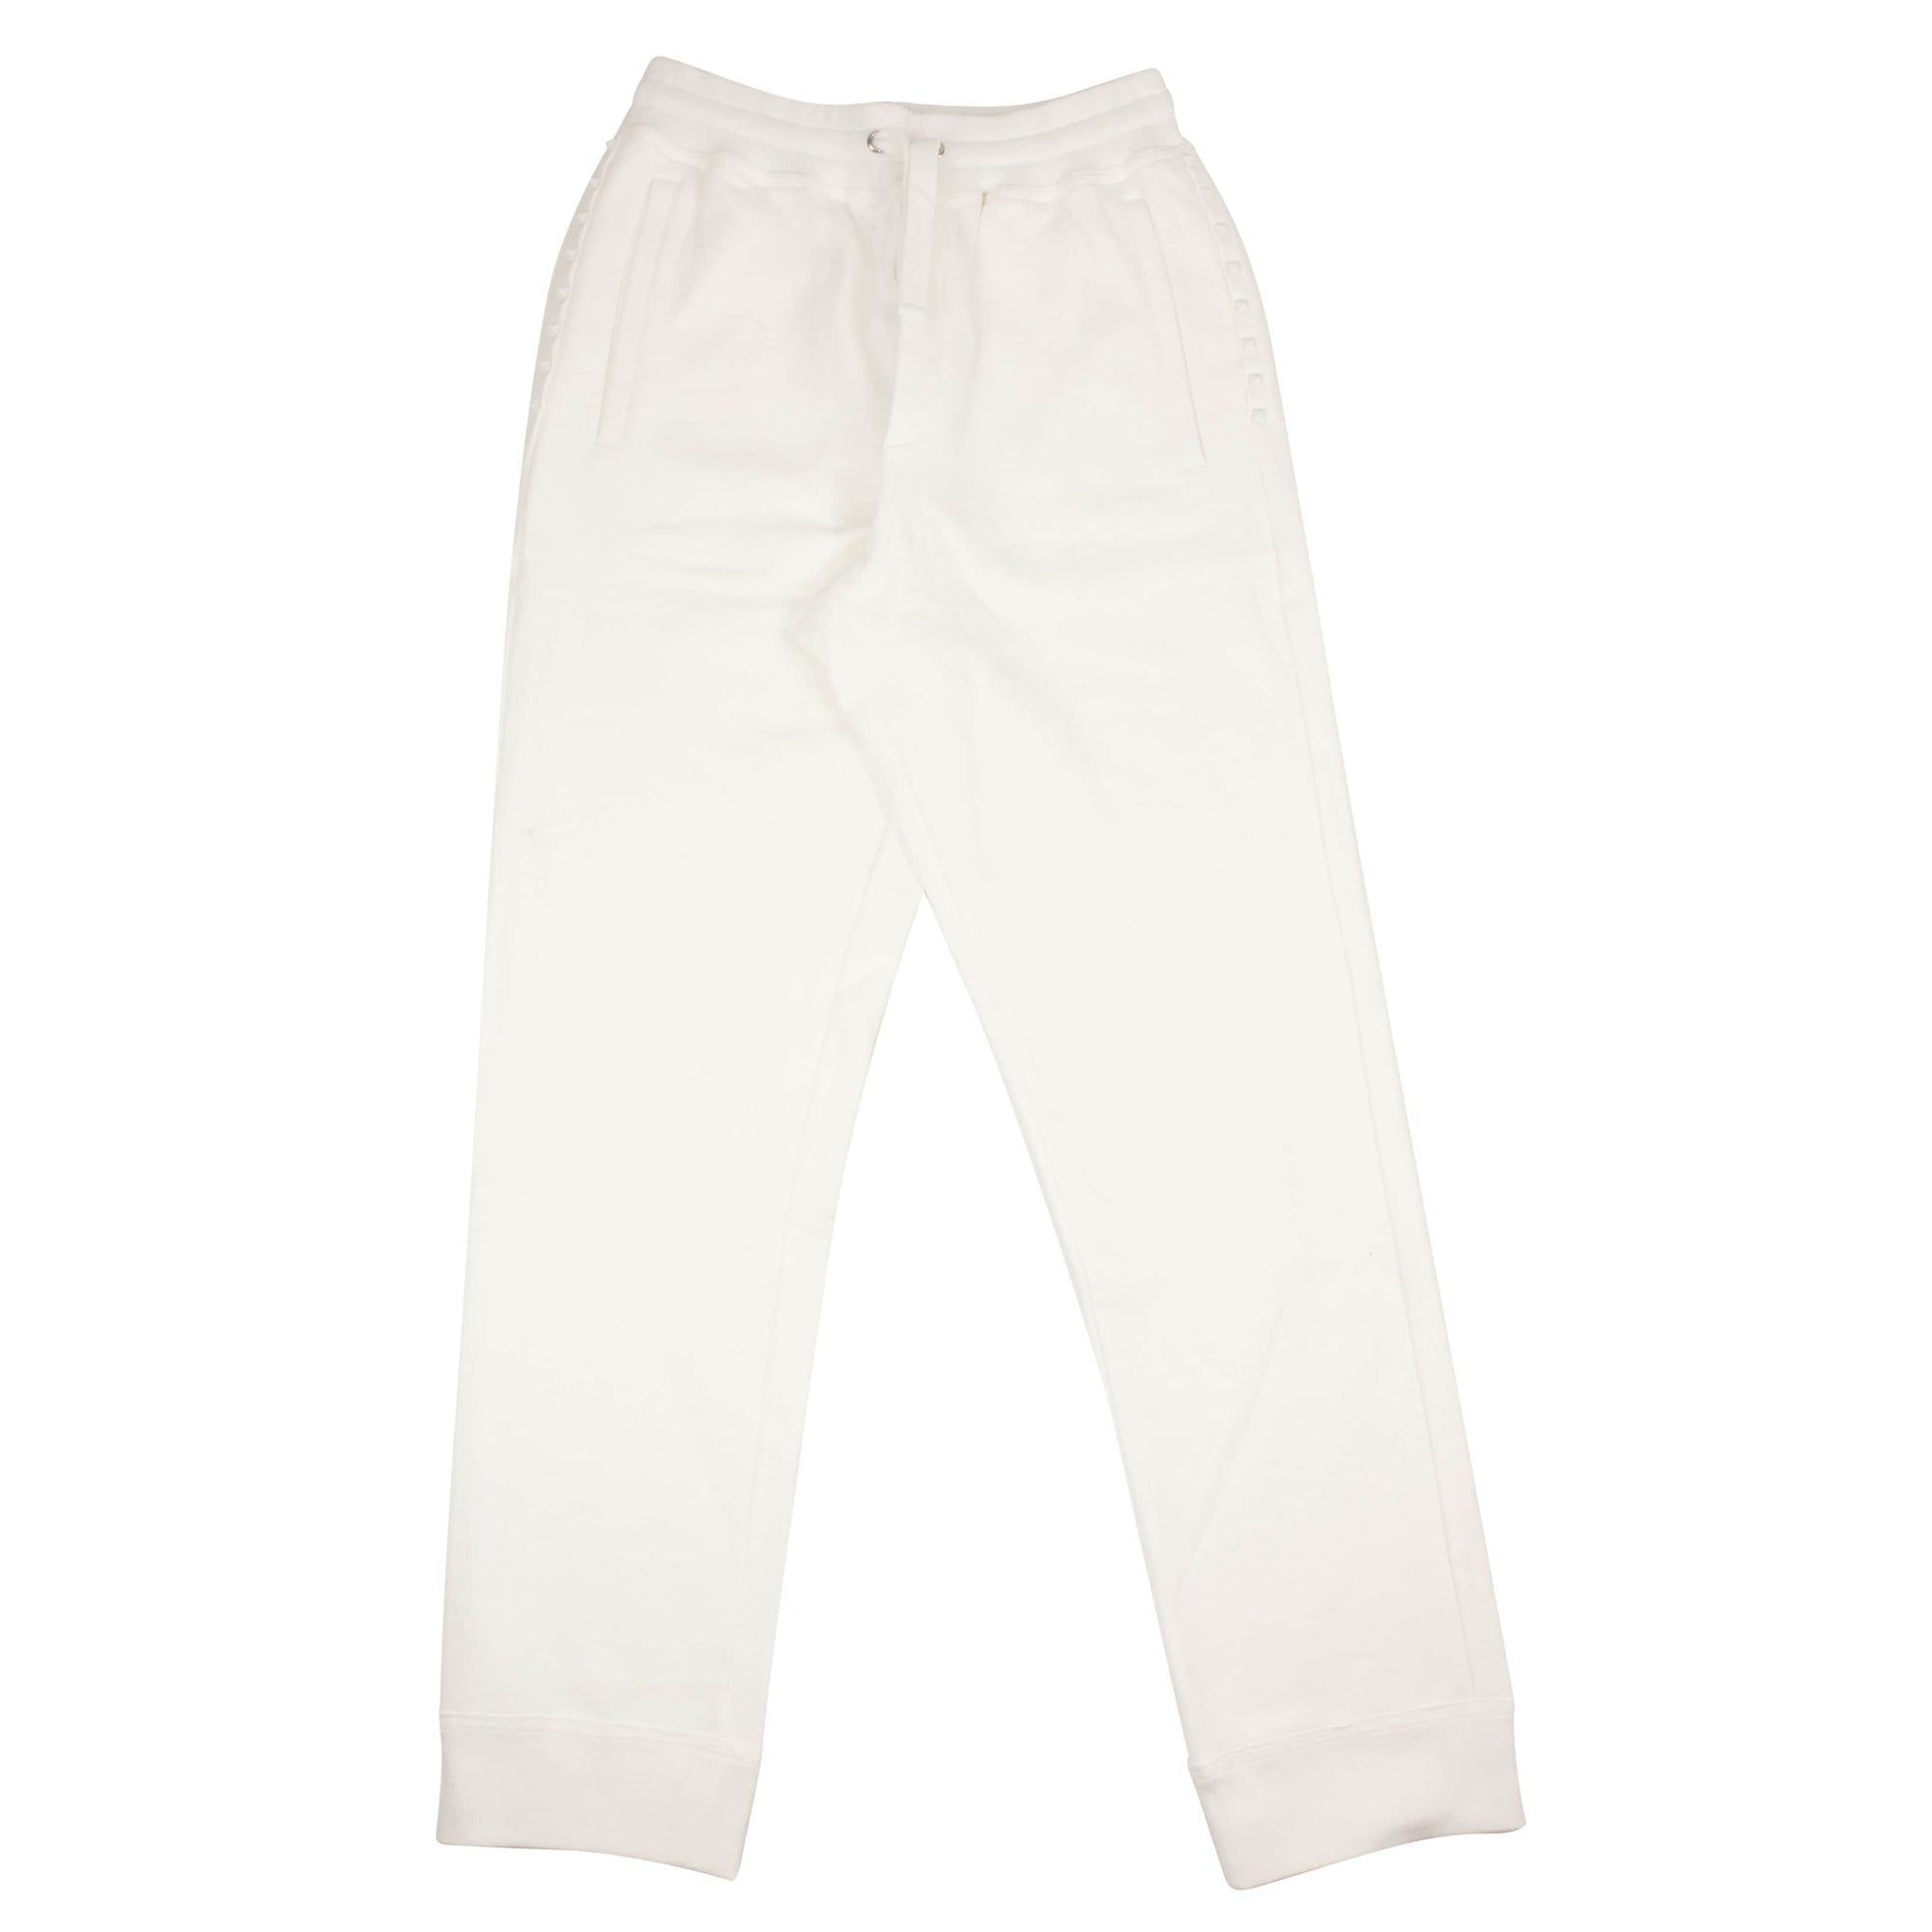 Valentino 250-500, channelenable-all, chicmi, couponcollection, gender-mens, main-clothing, mens-casual-pants, mens-shoes, size-l, size-s, valentino White Jersey Studded Pantalone Sweatpants